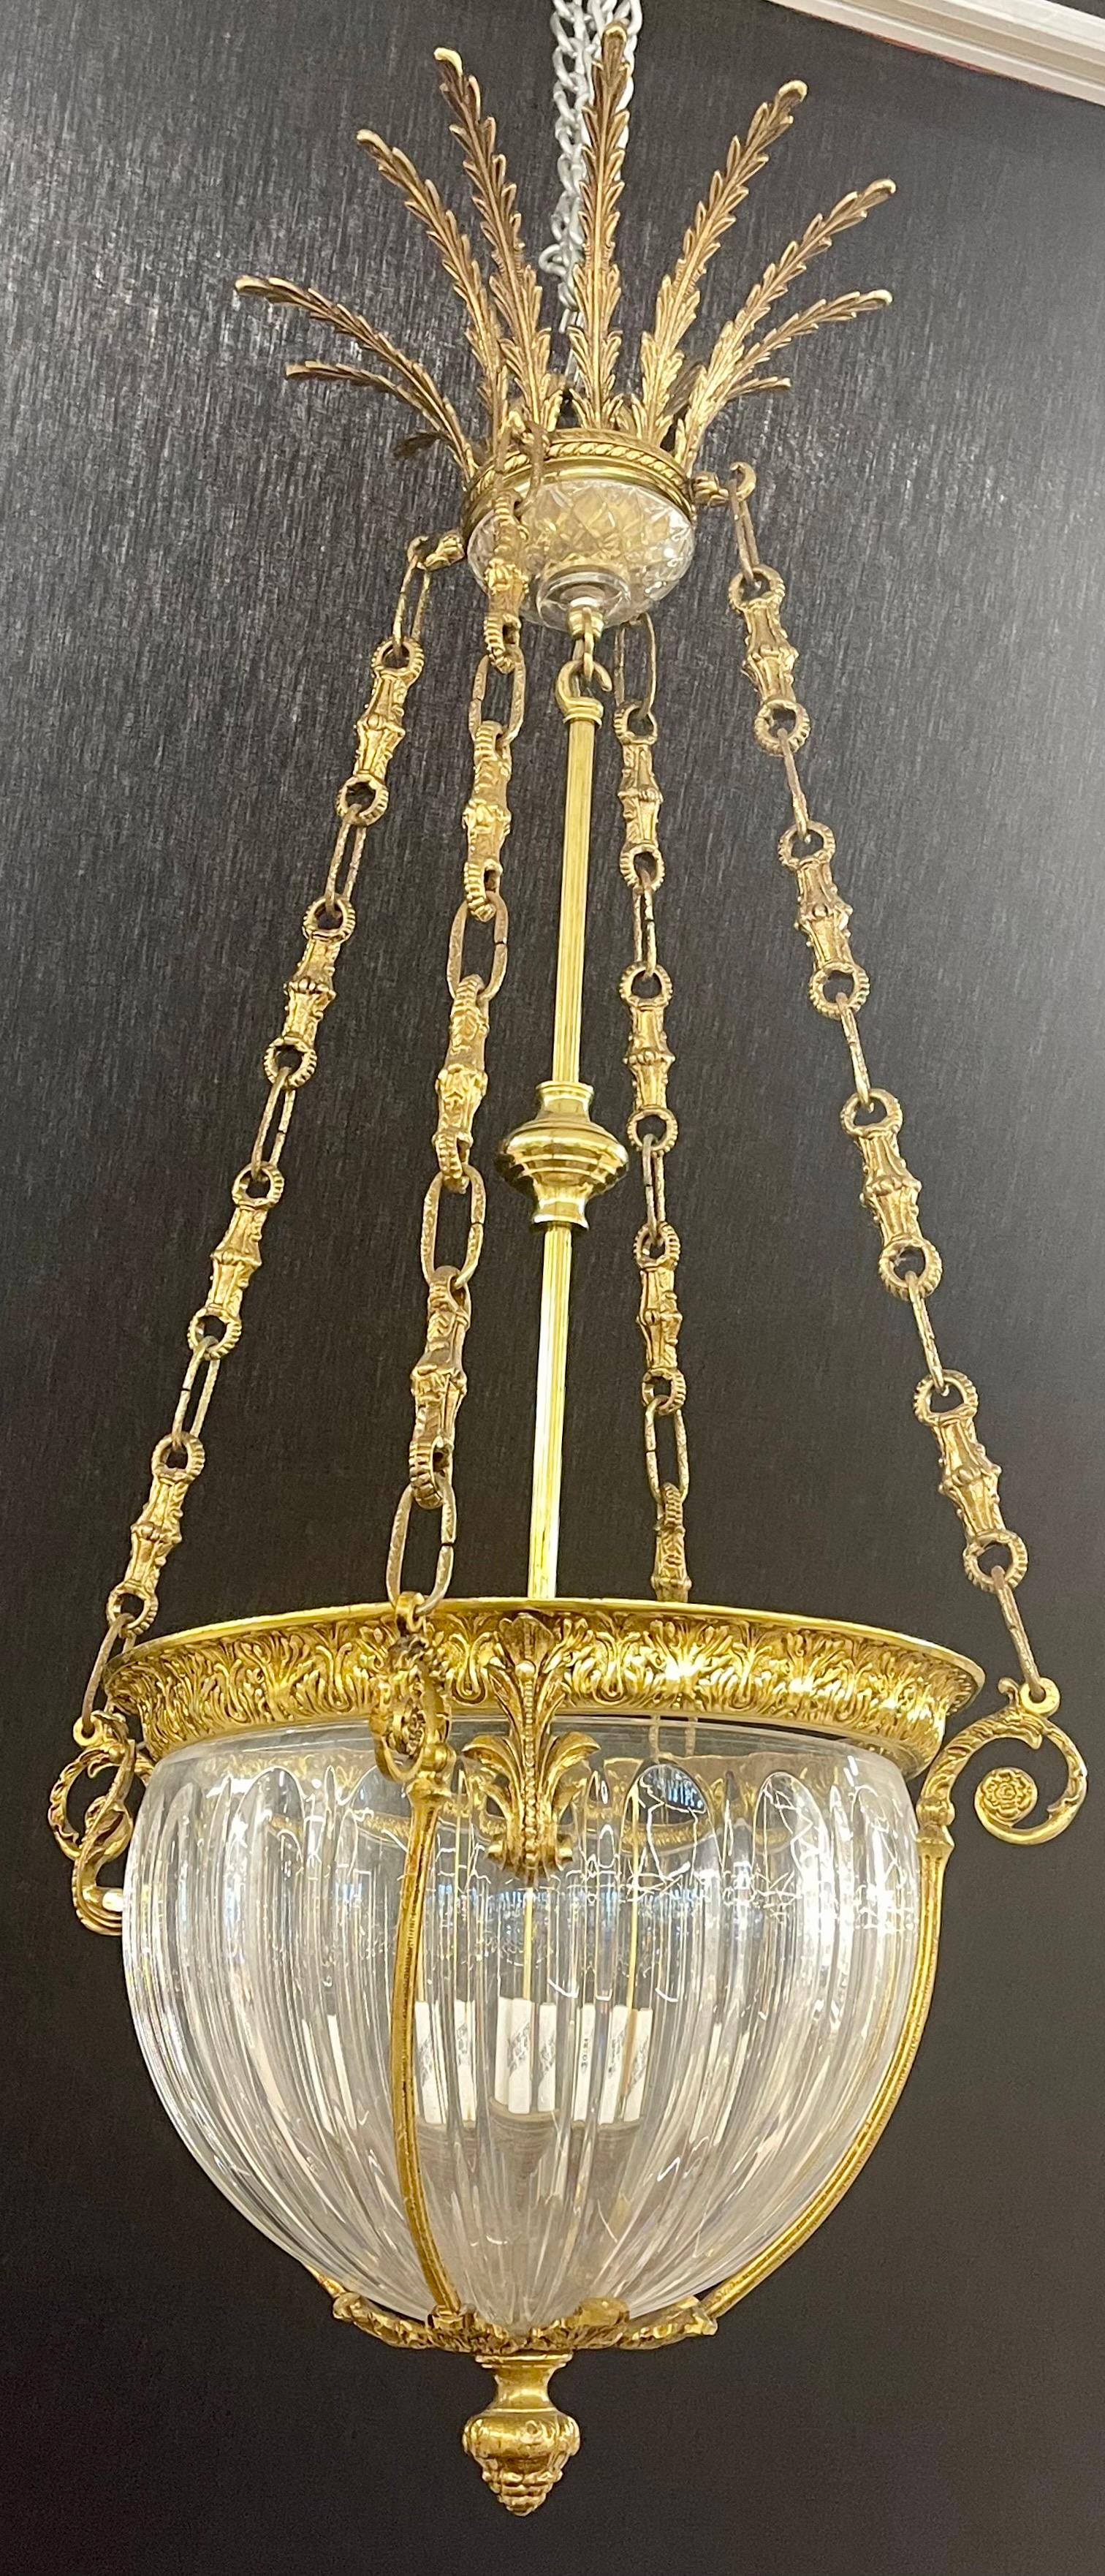 A gilt bronze chandelier having a decorative center crystal dome surrounded by Fine dore bronze decorative casting. The central column pole holding several lights suspended by three dore chains leading to a feather decorated canopy. Having four